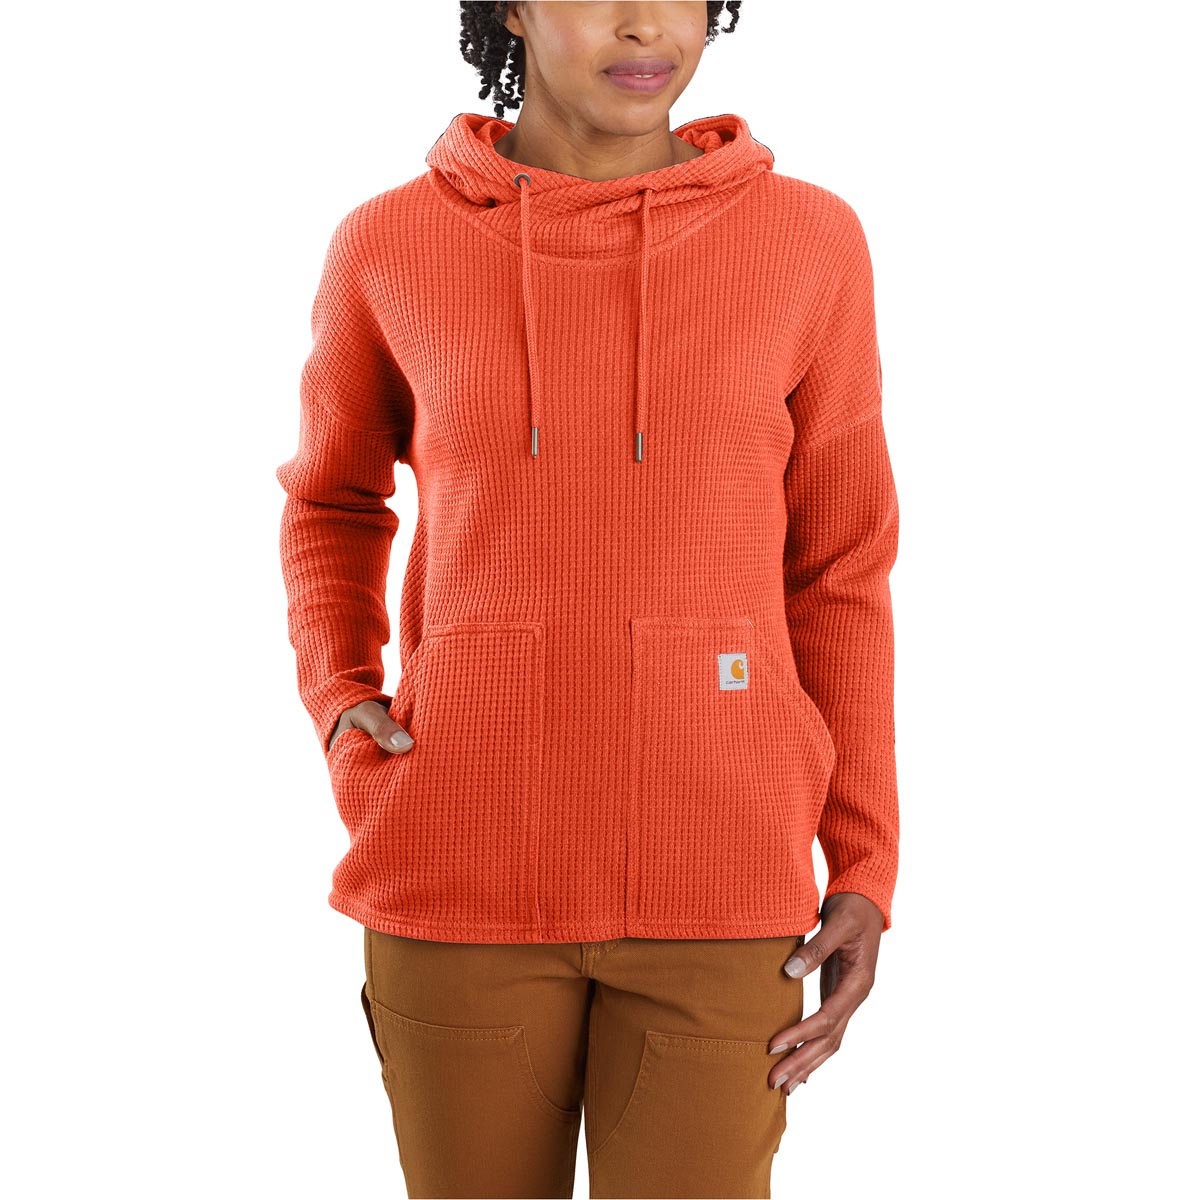 Carhartt Women's Relaxed Fit Heavyweight LS Hooded Thermal Shirt - Discontinued Pricing